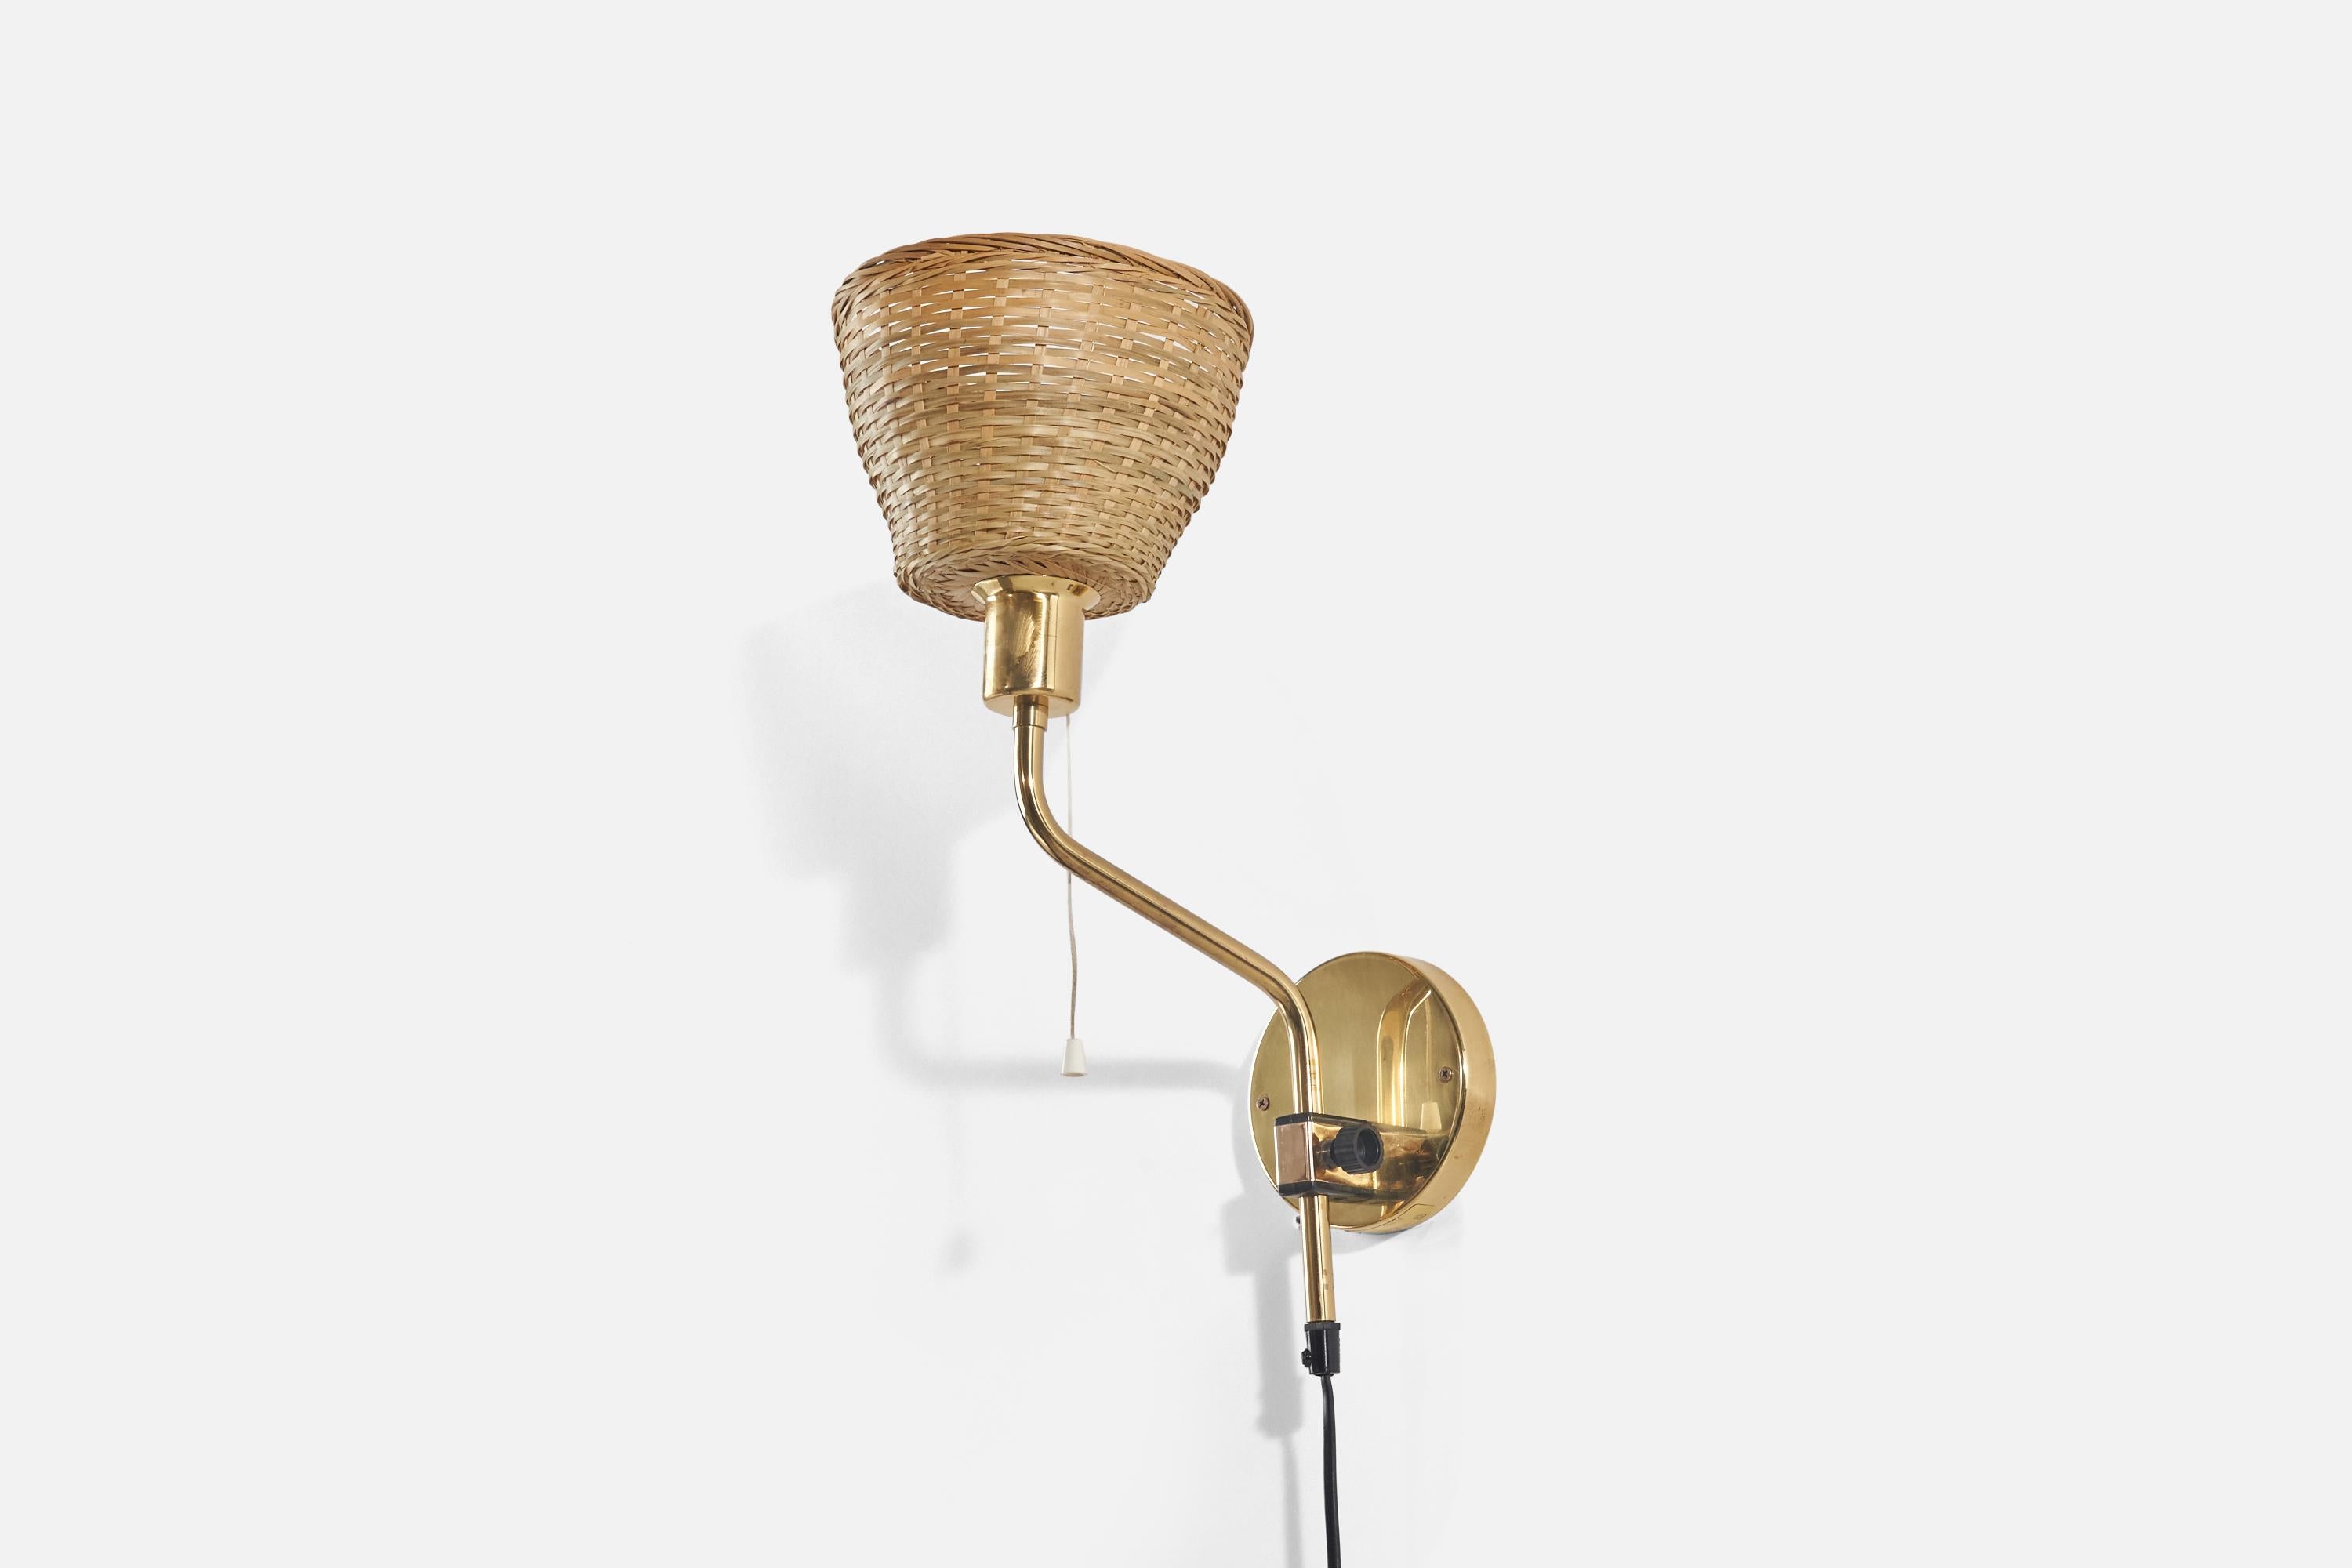 A brass and rattan, adjustable wall light designed by Jan Wickelgren and produced by Aneta, Sweden, 1970s.

Dimensions variable, measured as illustrated in first image.

Sold with lampshade(s). Dimensions stated are of sconce with